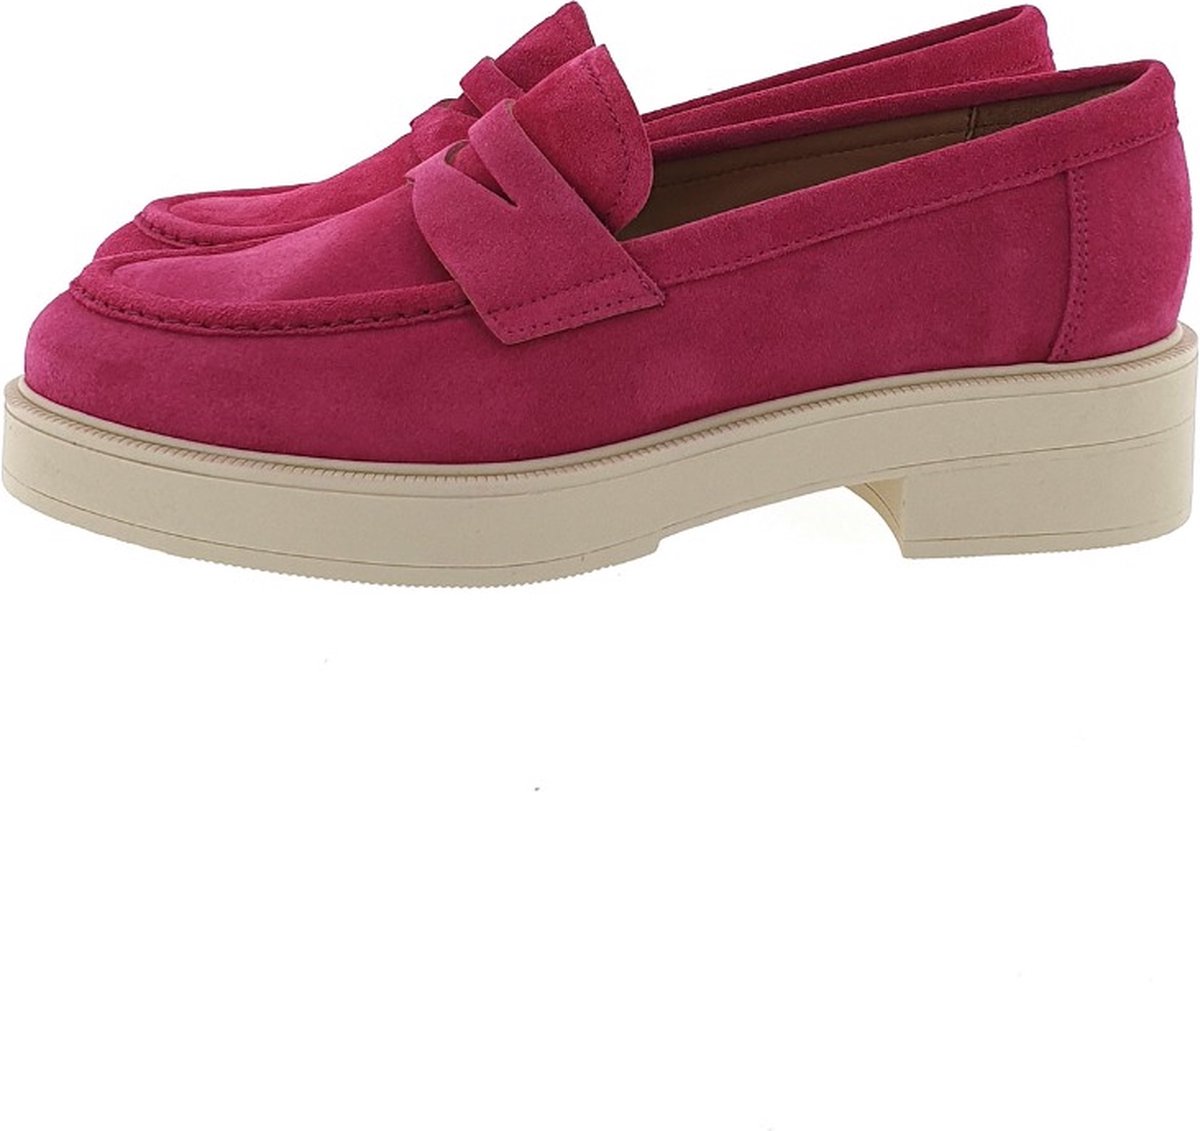 CTWLK London loafer fuxia, 39 / 6